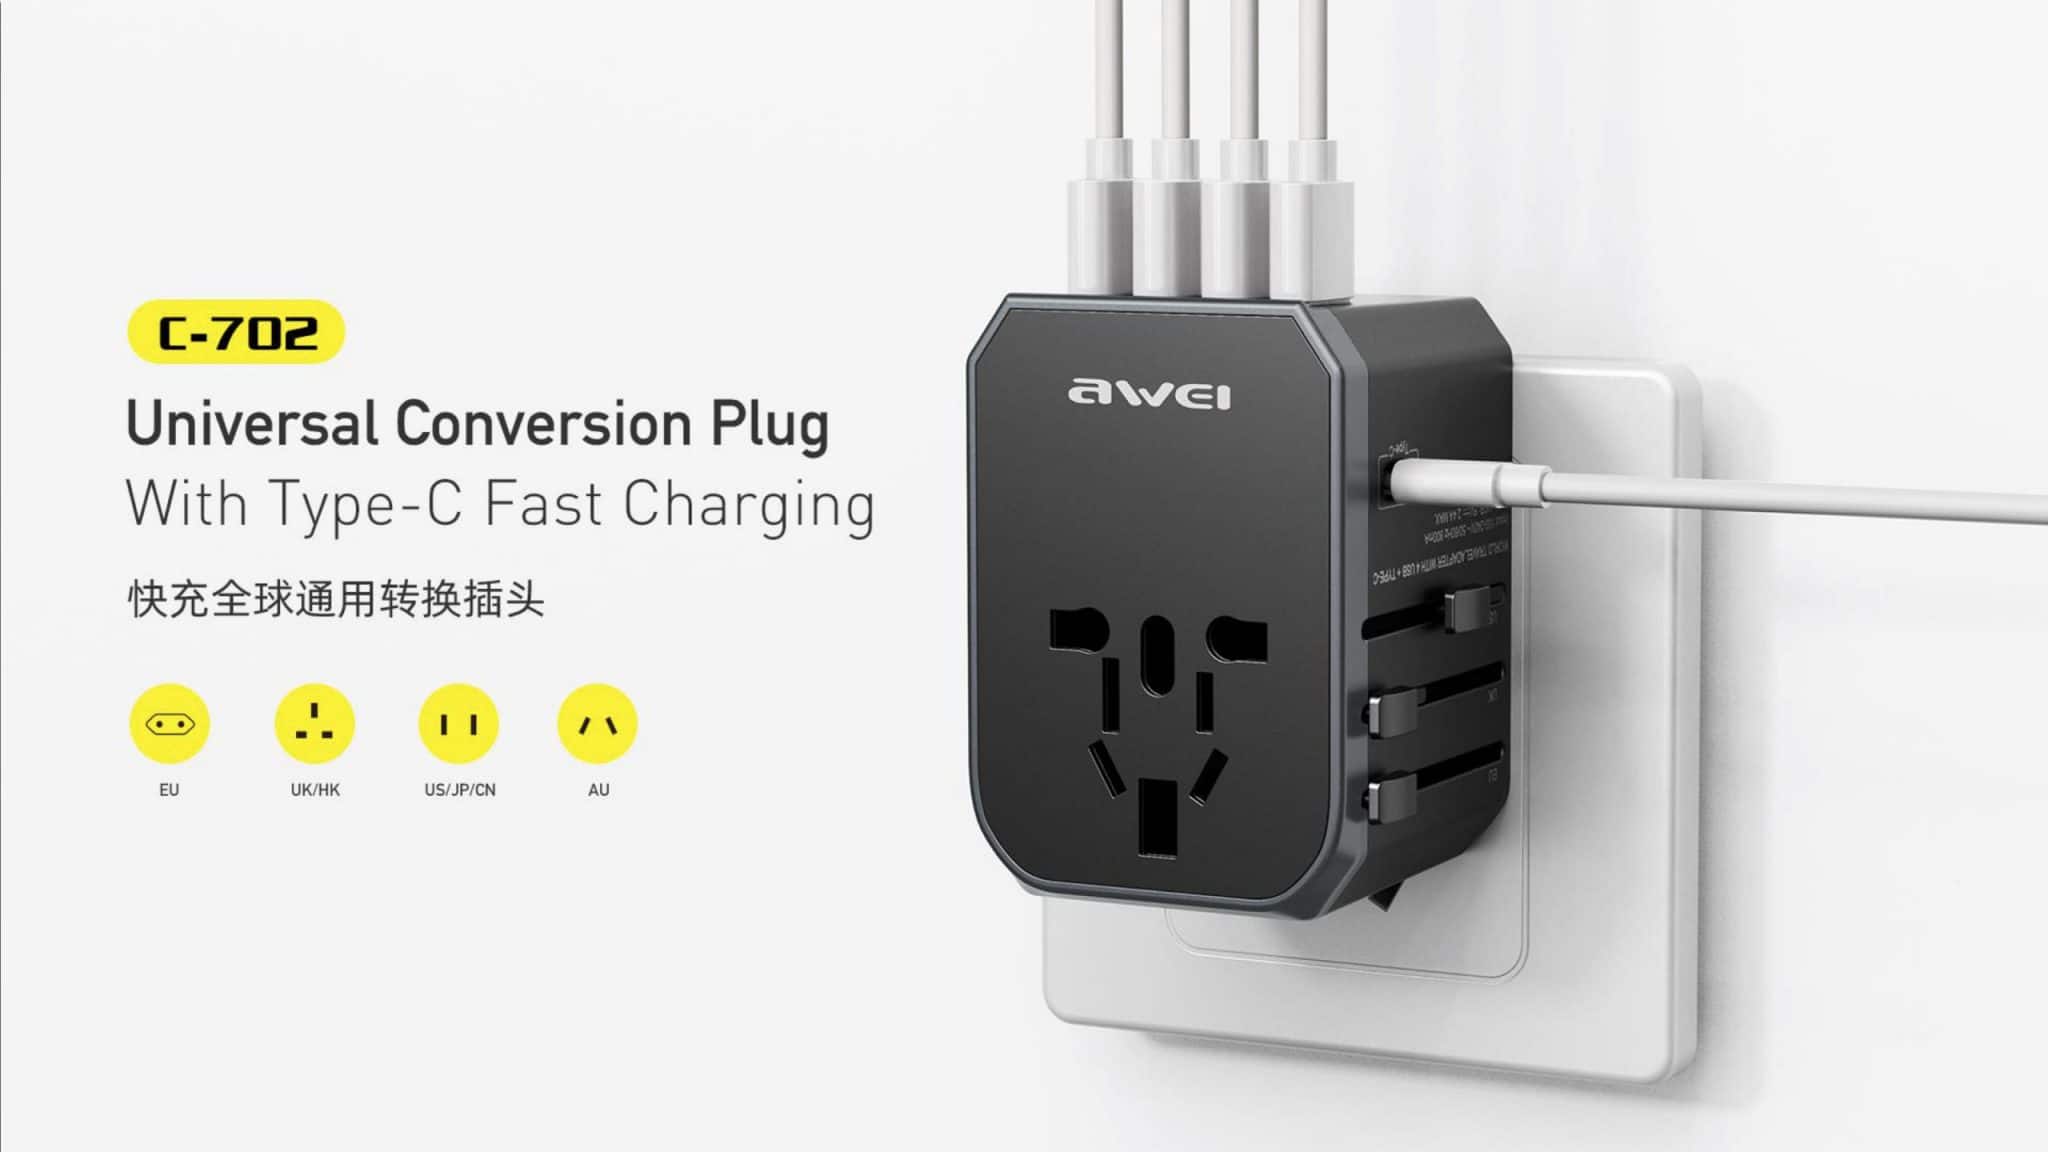 Awei Universal Conversion Plug with Type-C Fast Charging C-702